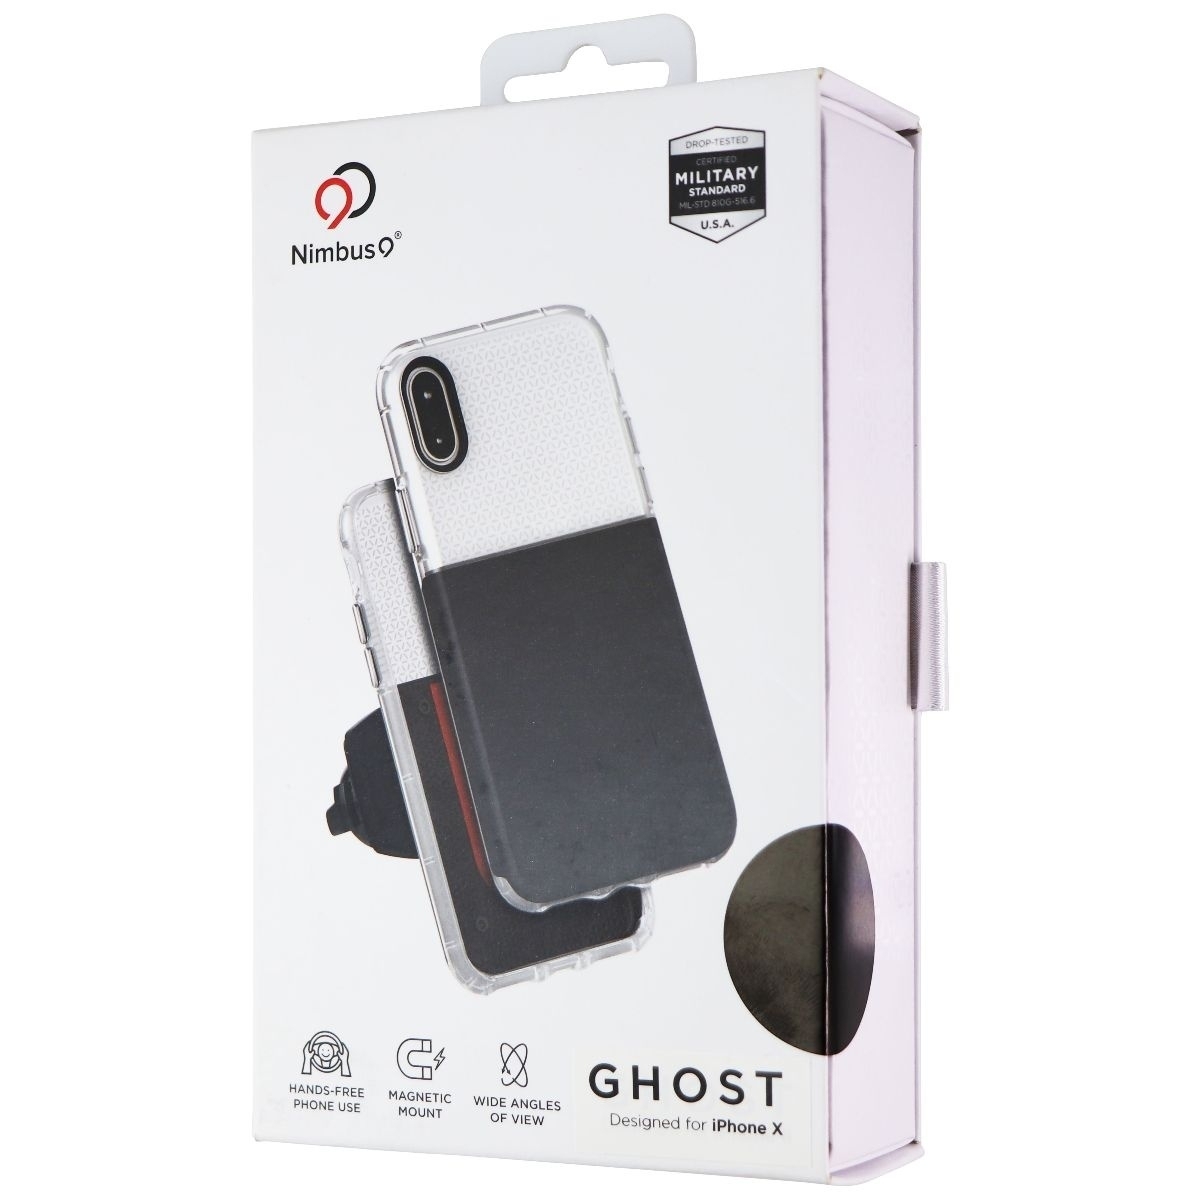 Nimbus9 Ghost Series Case And Mount Kit For IPhone Xs/X - Black/Clear